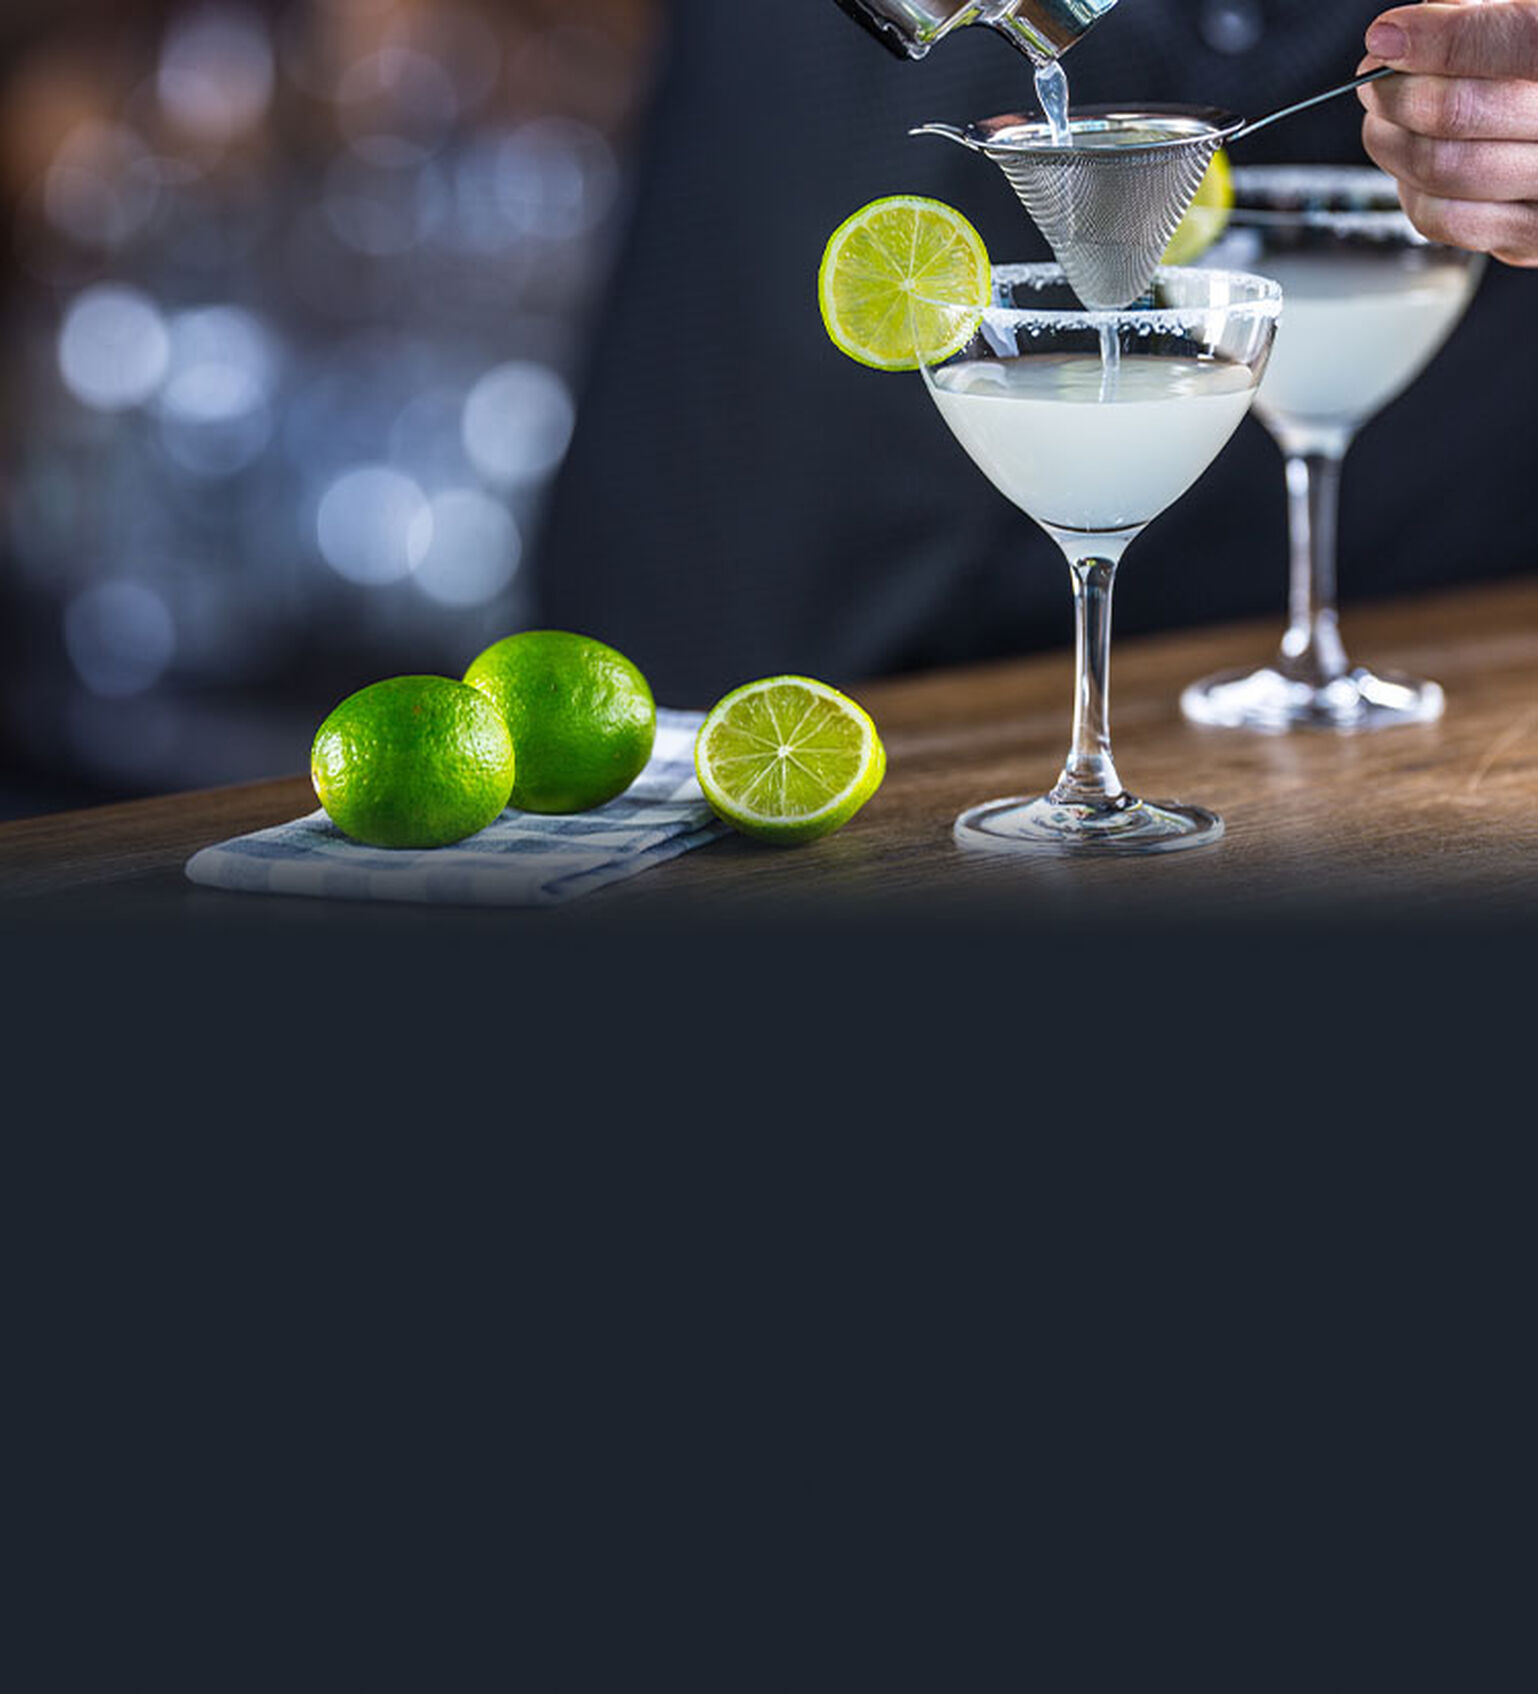 Image of a Daiquiri being prepared on a wood bar top.